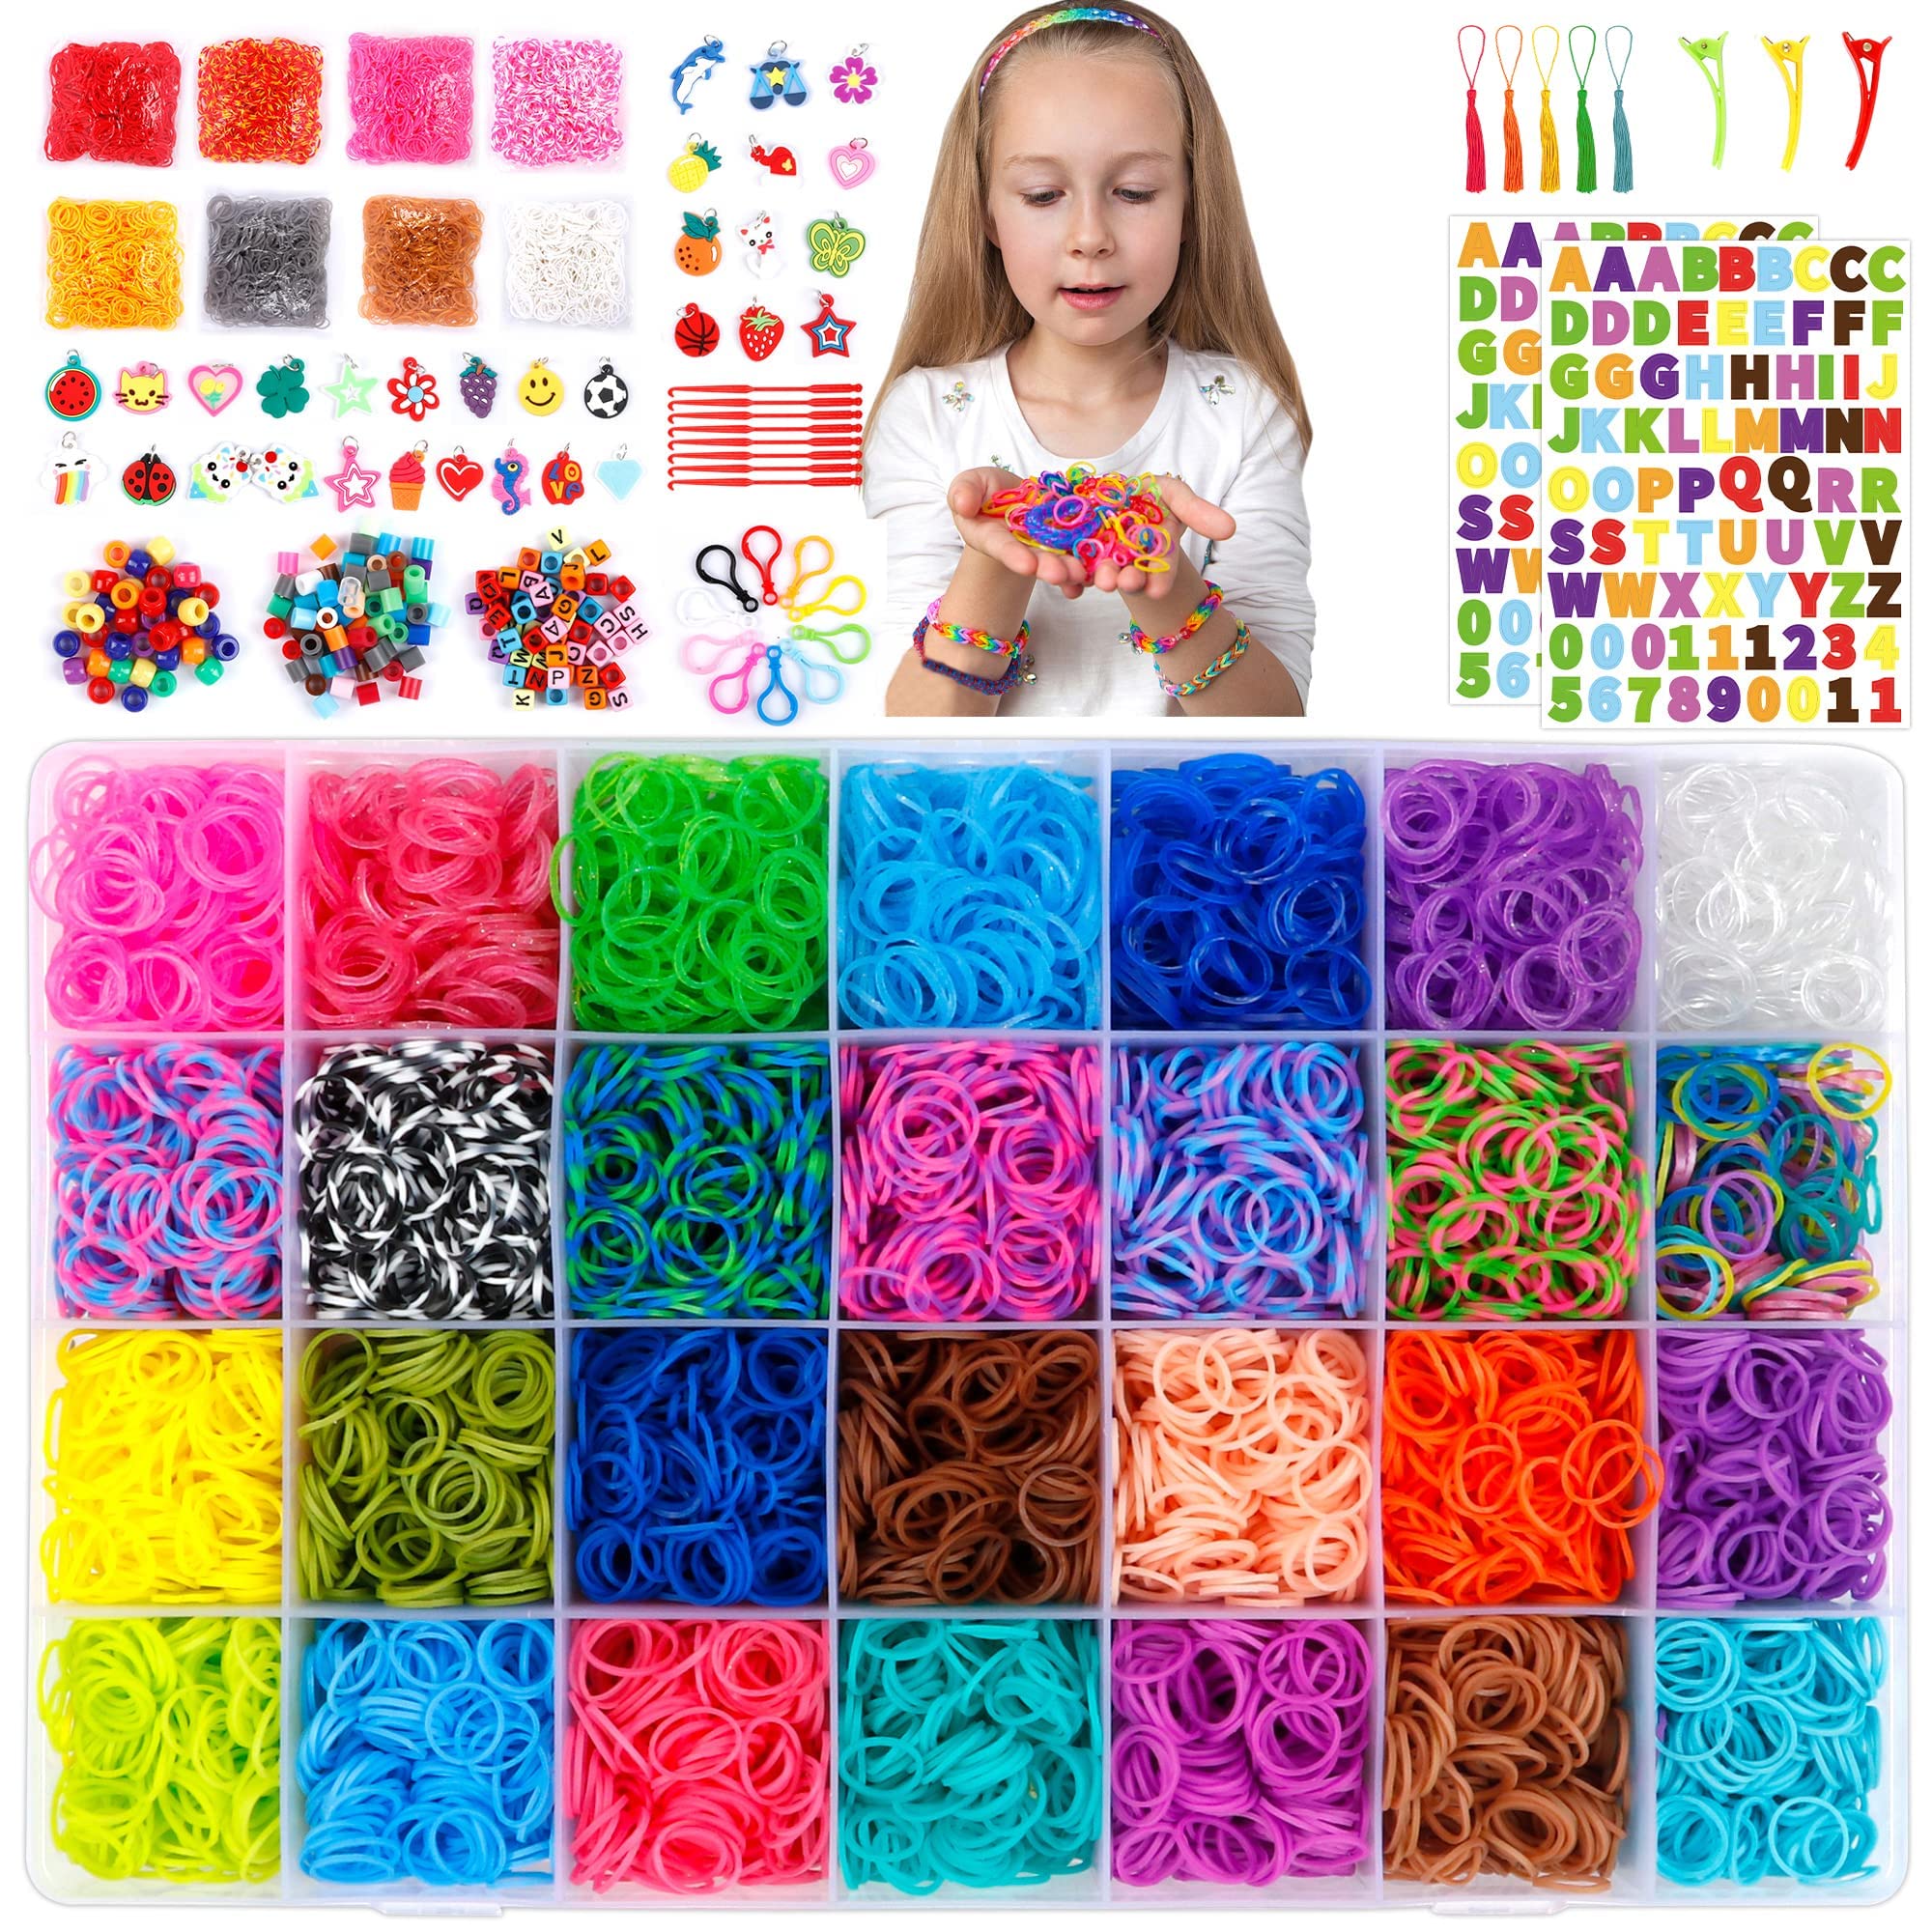 18,980+ Rubber Bands Refill Loom Kit, 37 Colors Loom Bands, 600 S